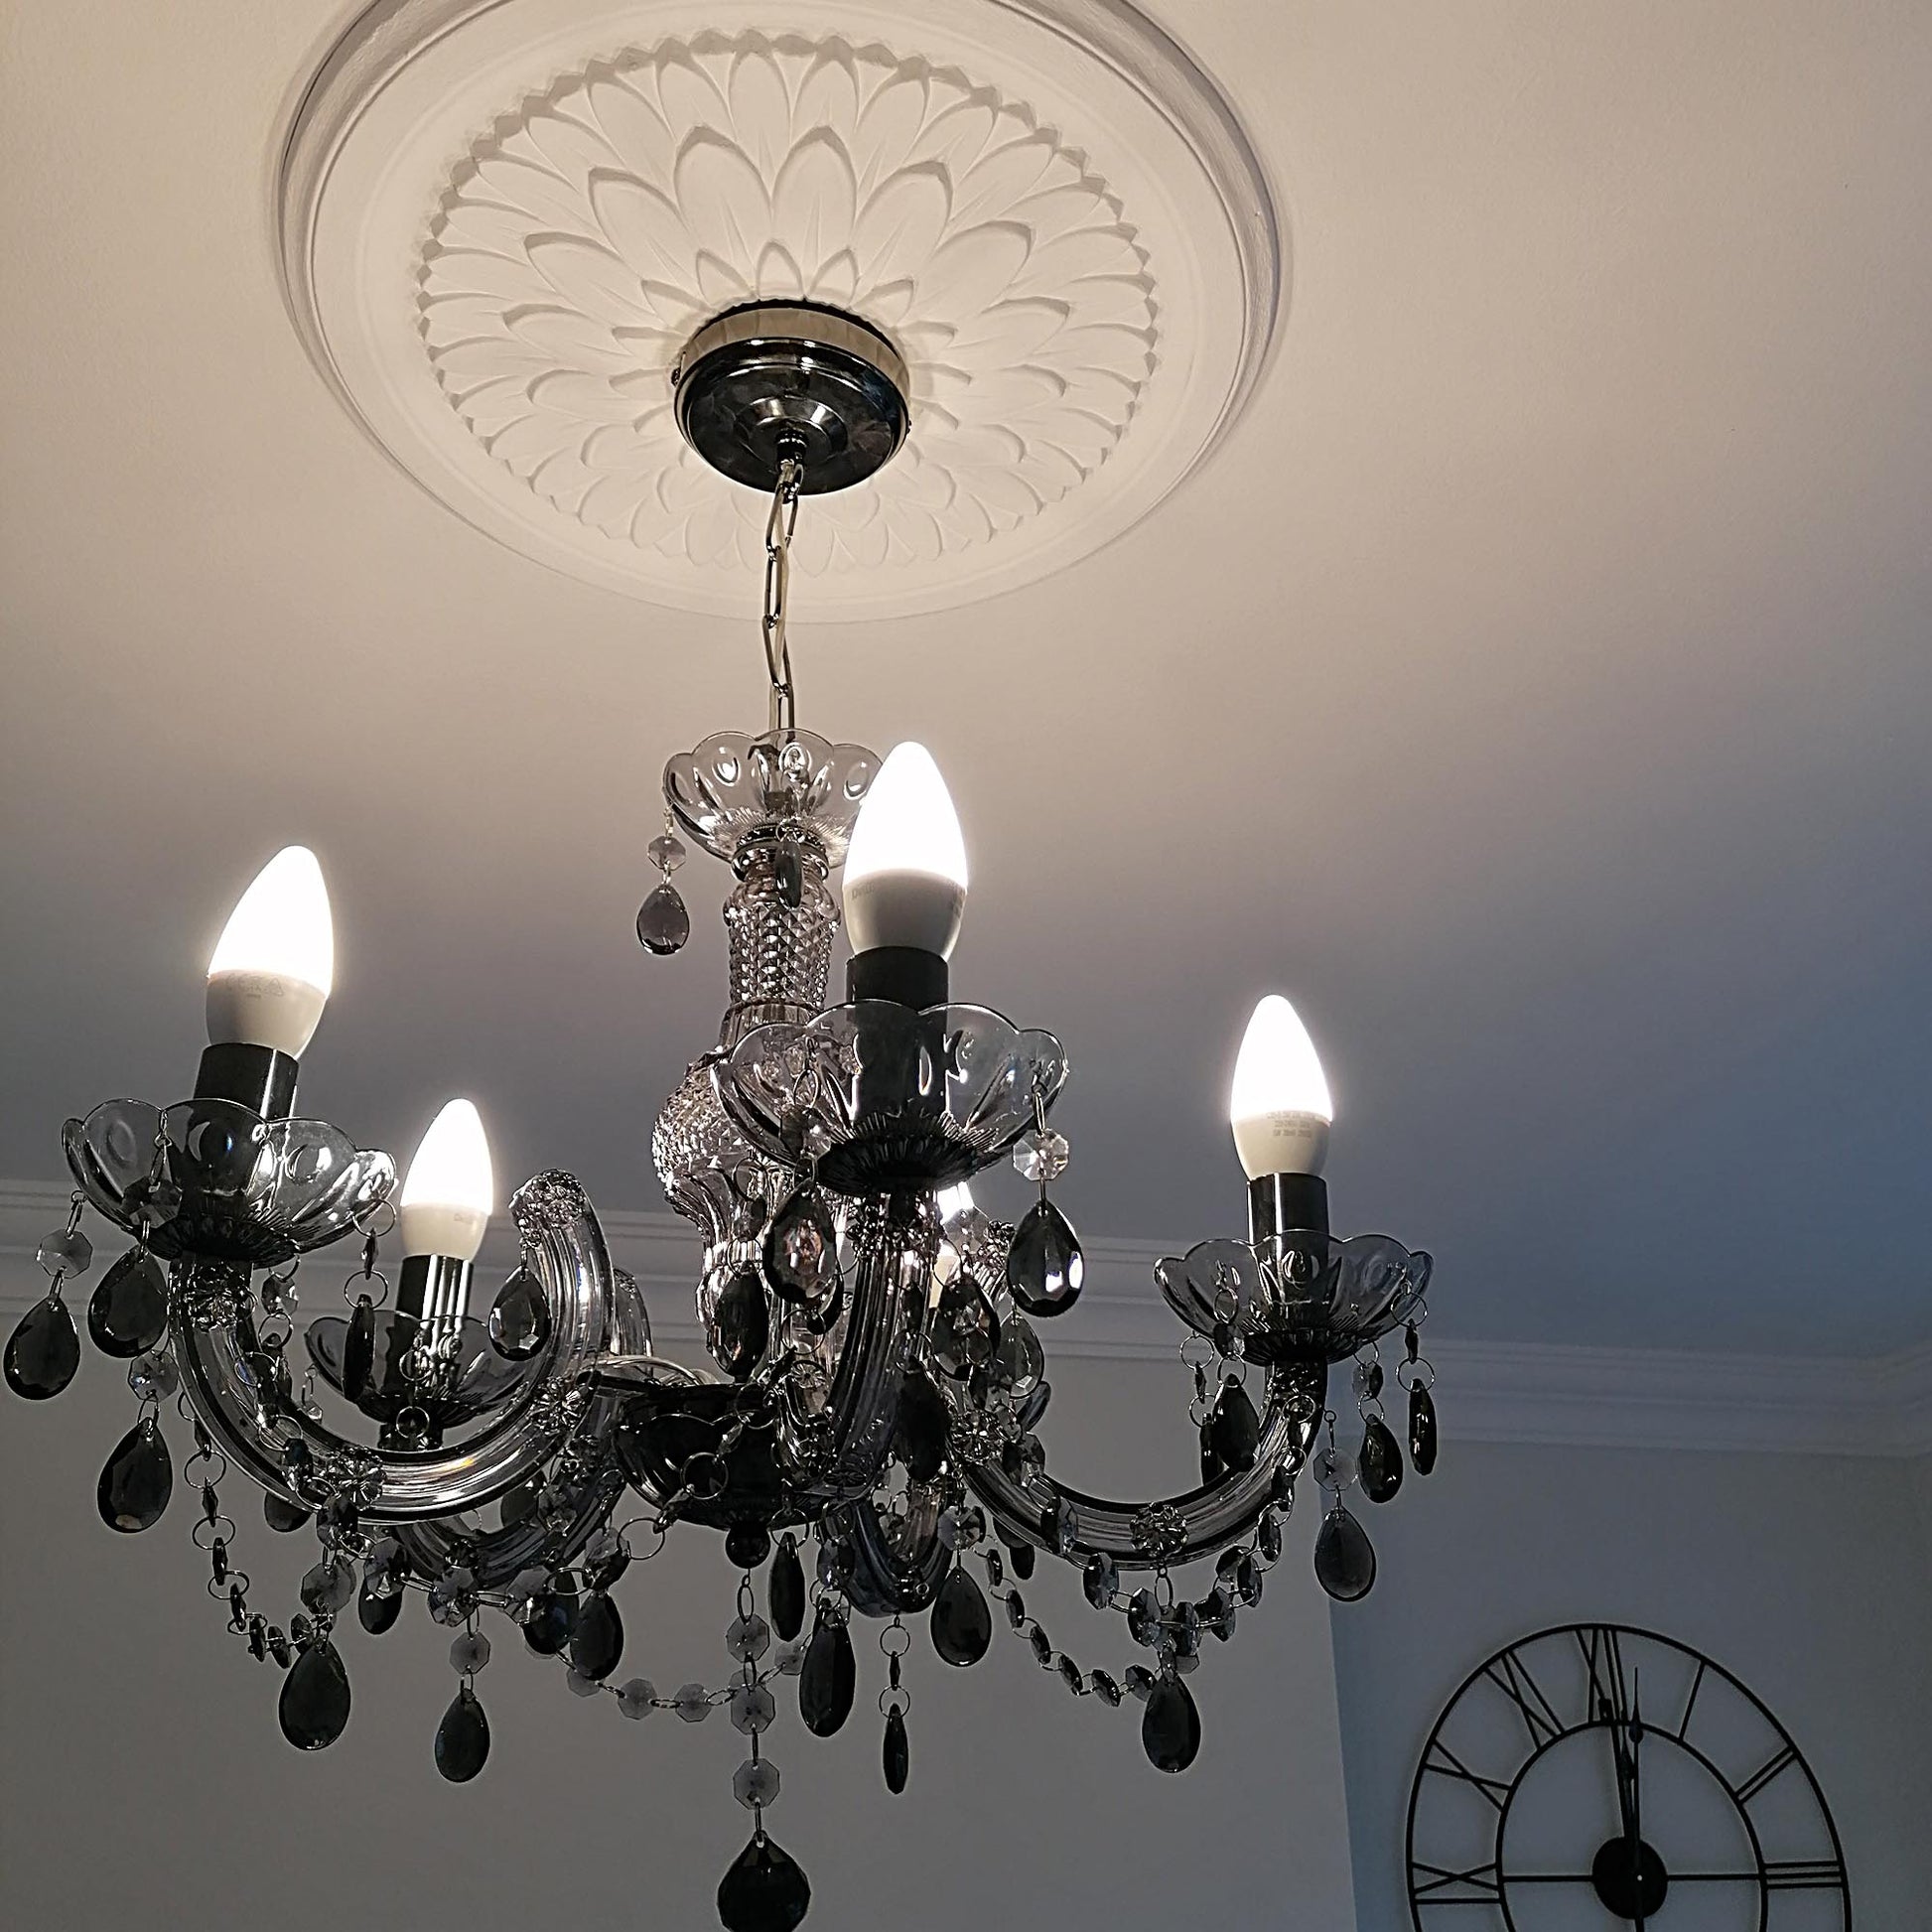 Victorian Floral Plaster Ceiling Rose with black light fitting